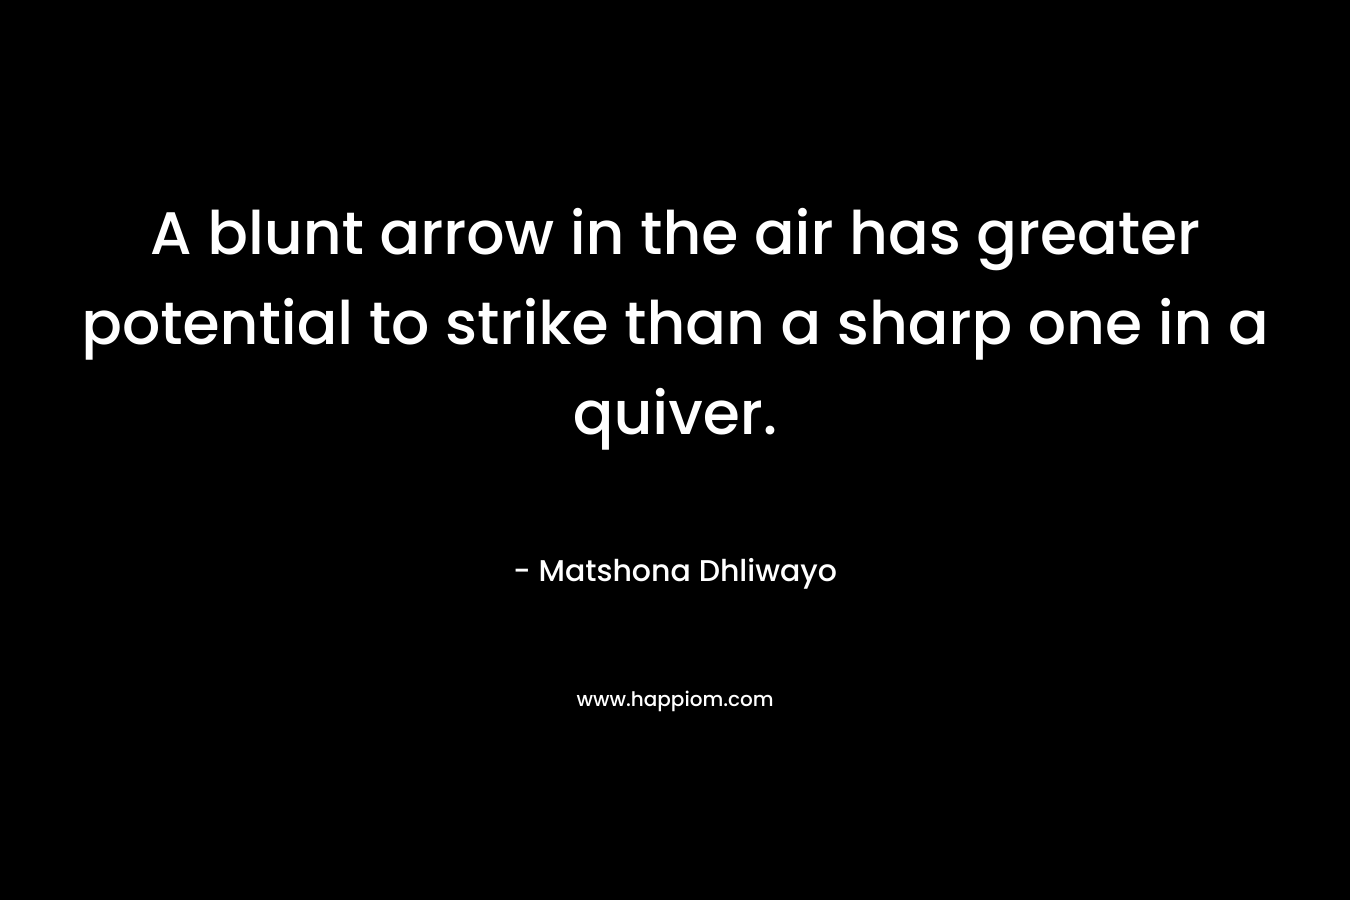 A blunt arrow in the air has greater potential to strike than a sharp one in a quiver.